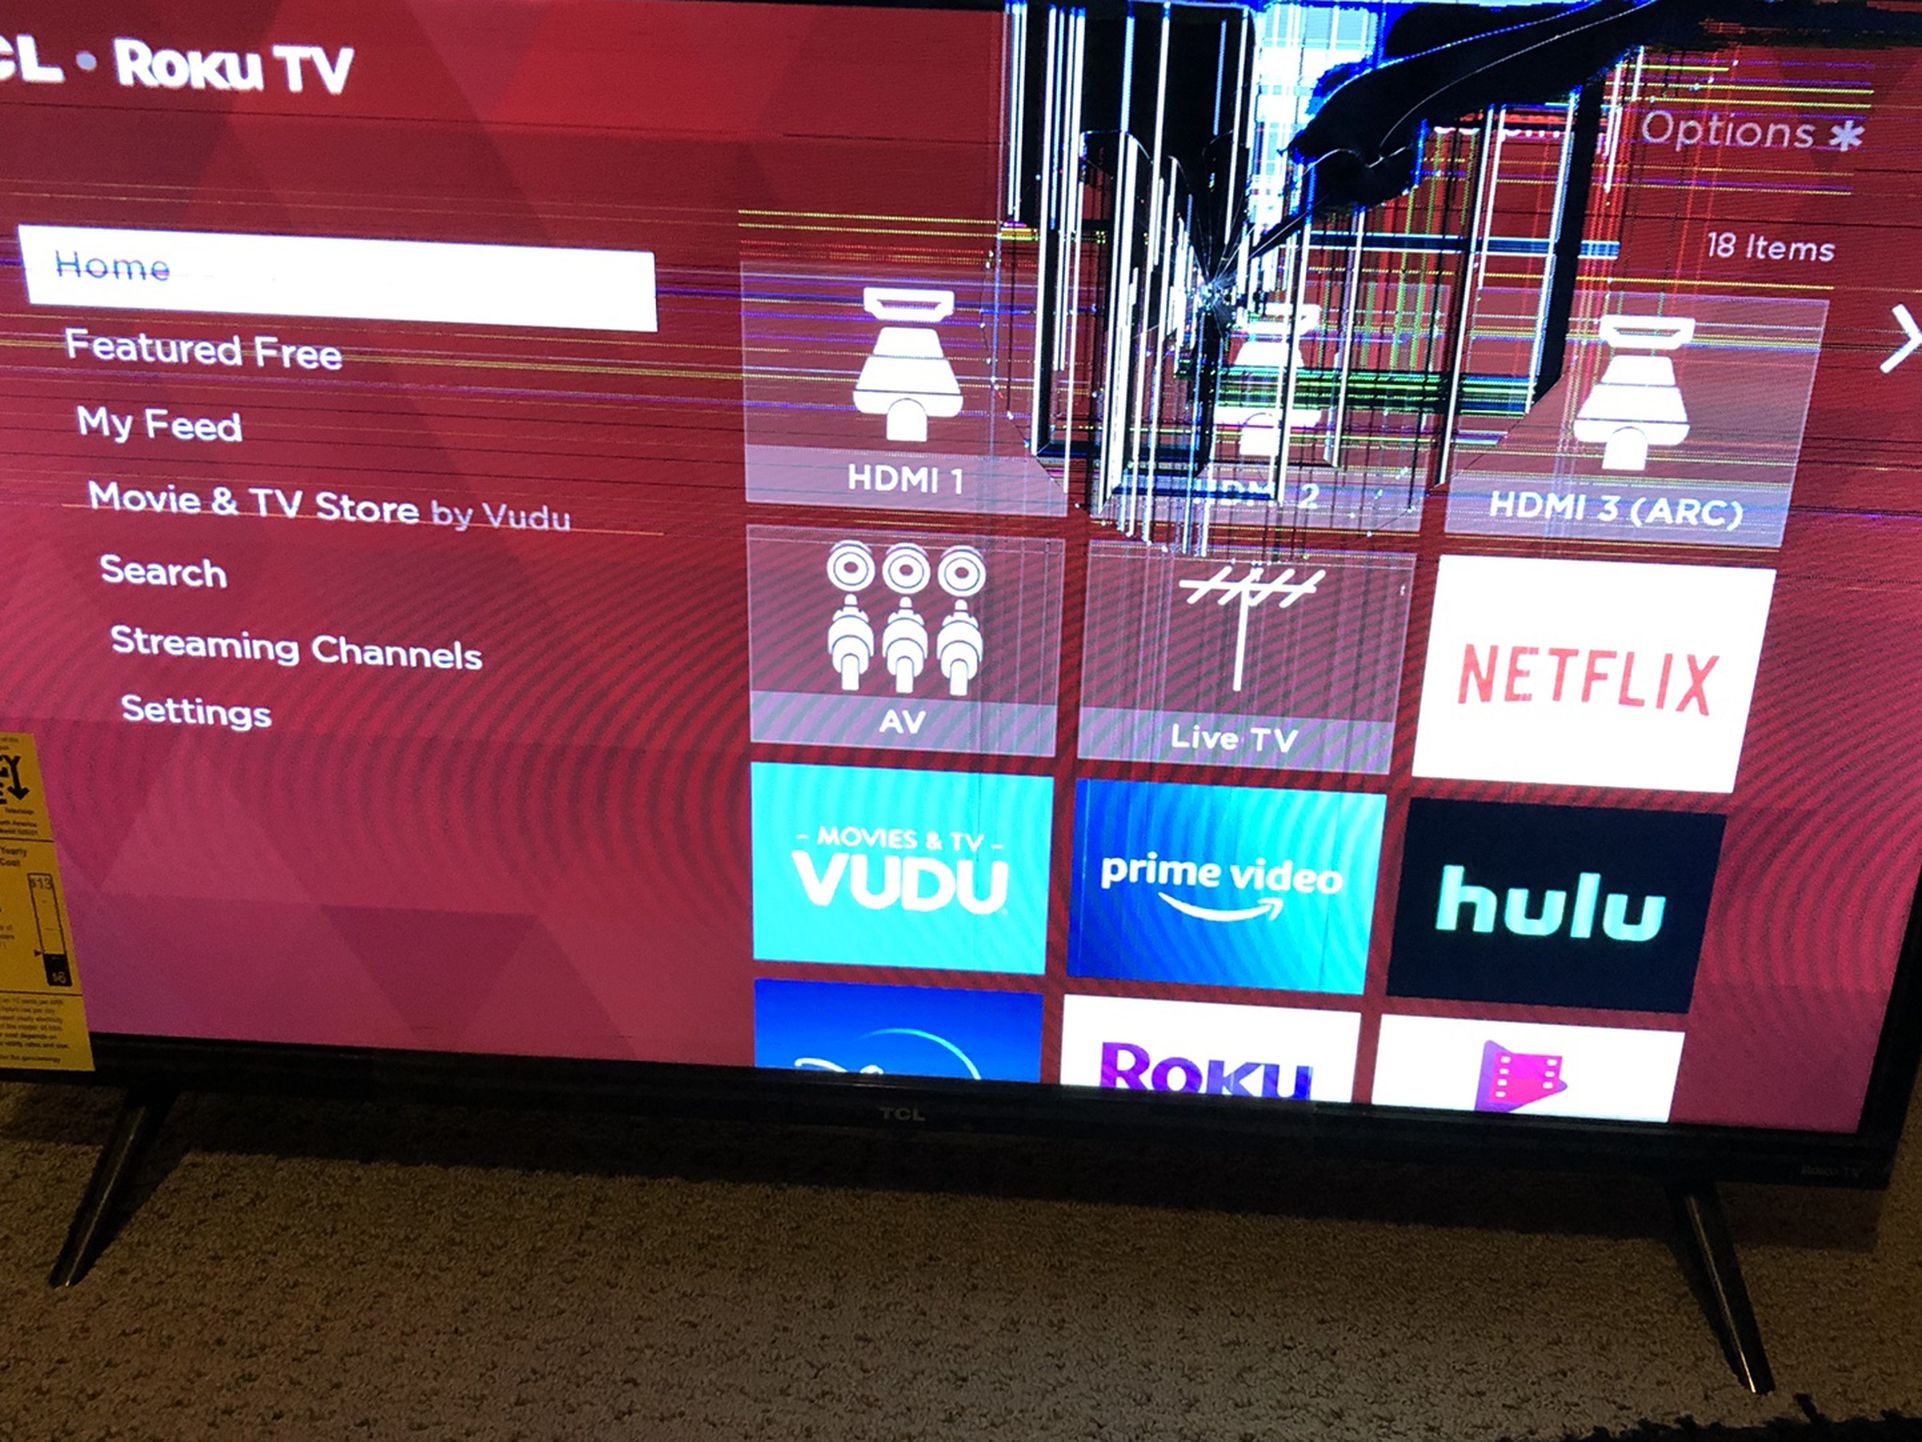 Barley Used TCL Roku Tv , Broken Screen Can Be Fixed!